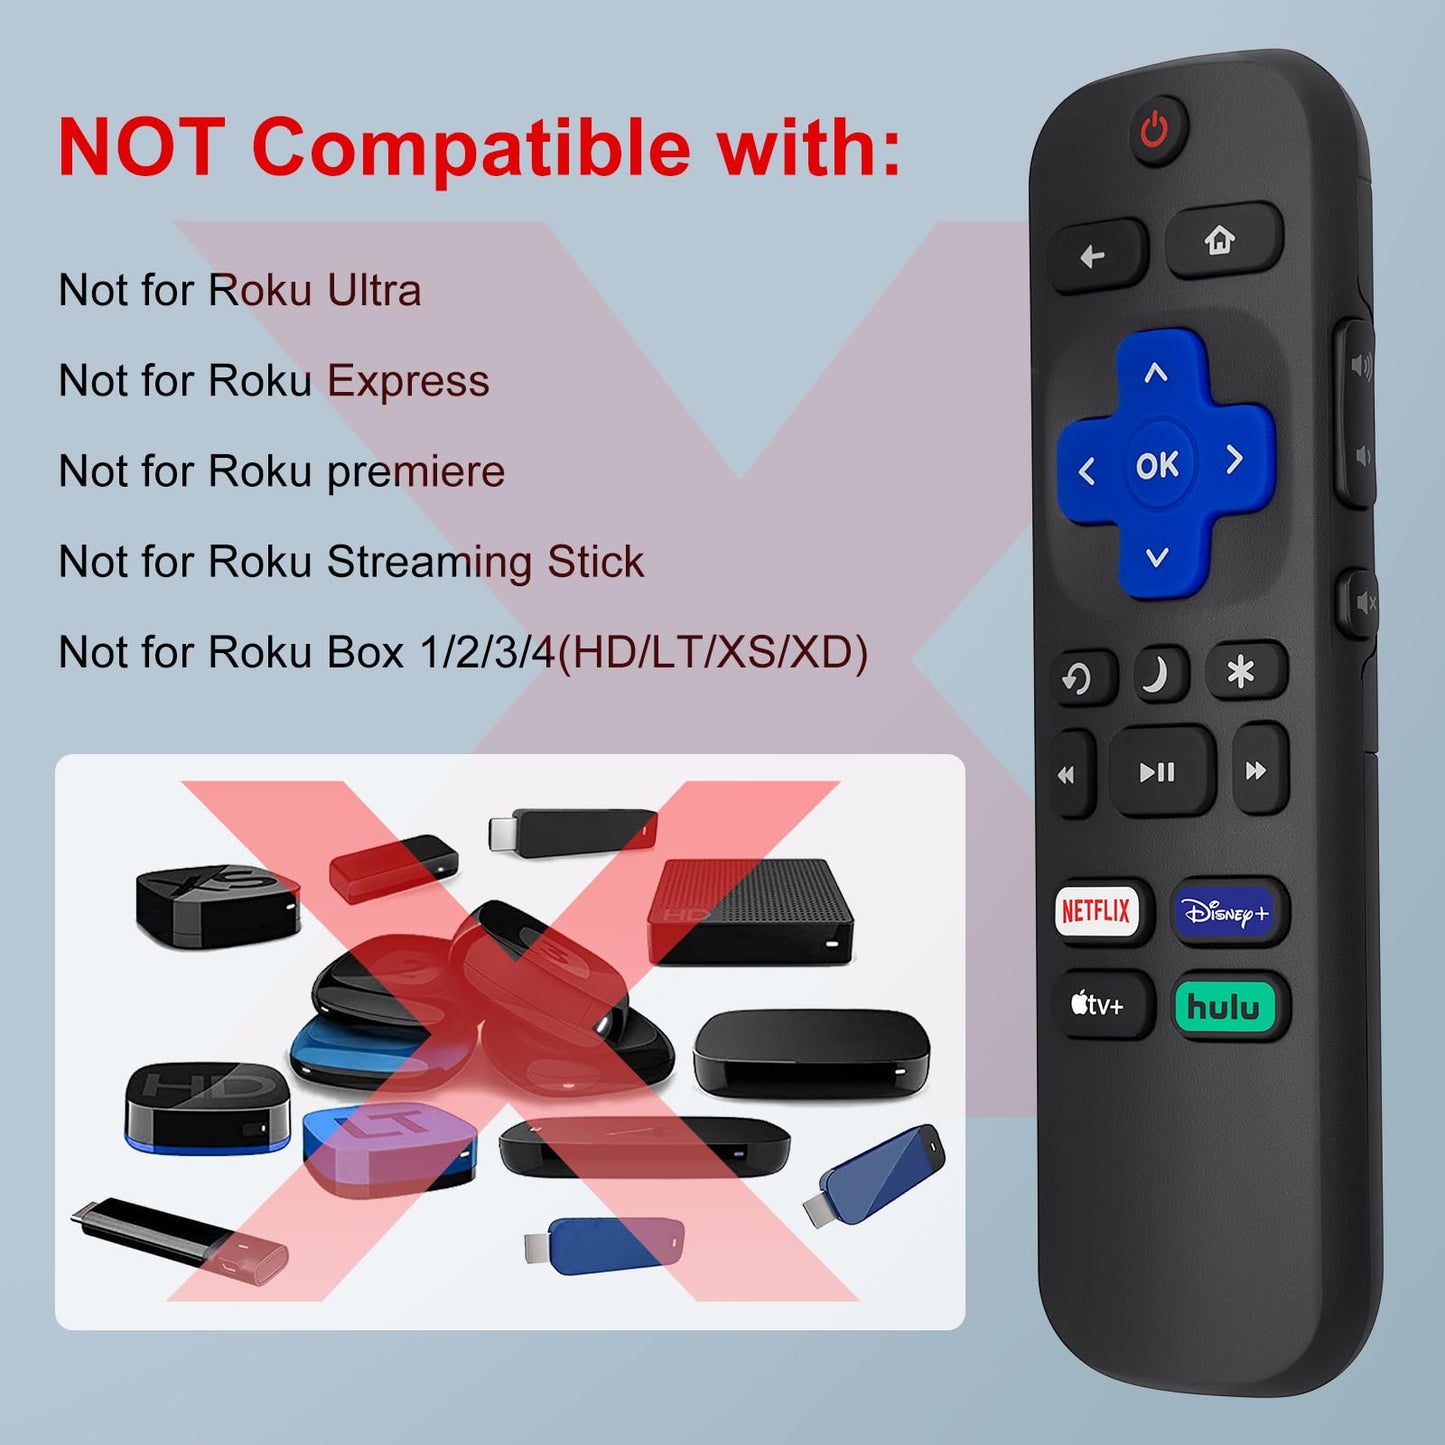 【Pack of 2】 Replacement for Roku-TV-Remote, Compatible for TCL Roku/Hisense Roku/Onn Roku/Sharp Roku Series Smart TVs (Not for Roku Stick and Box)